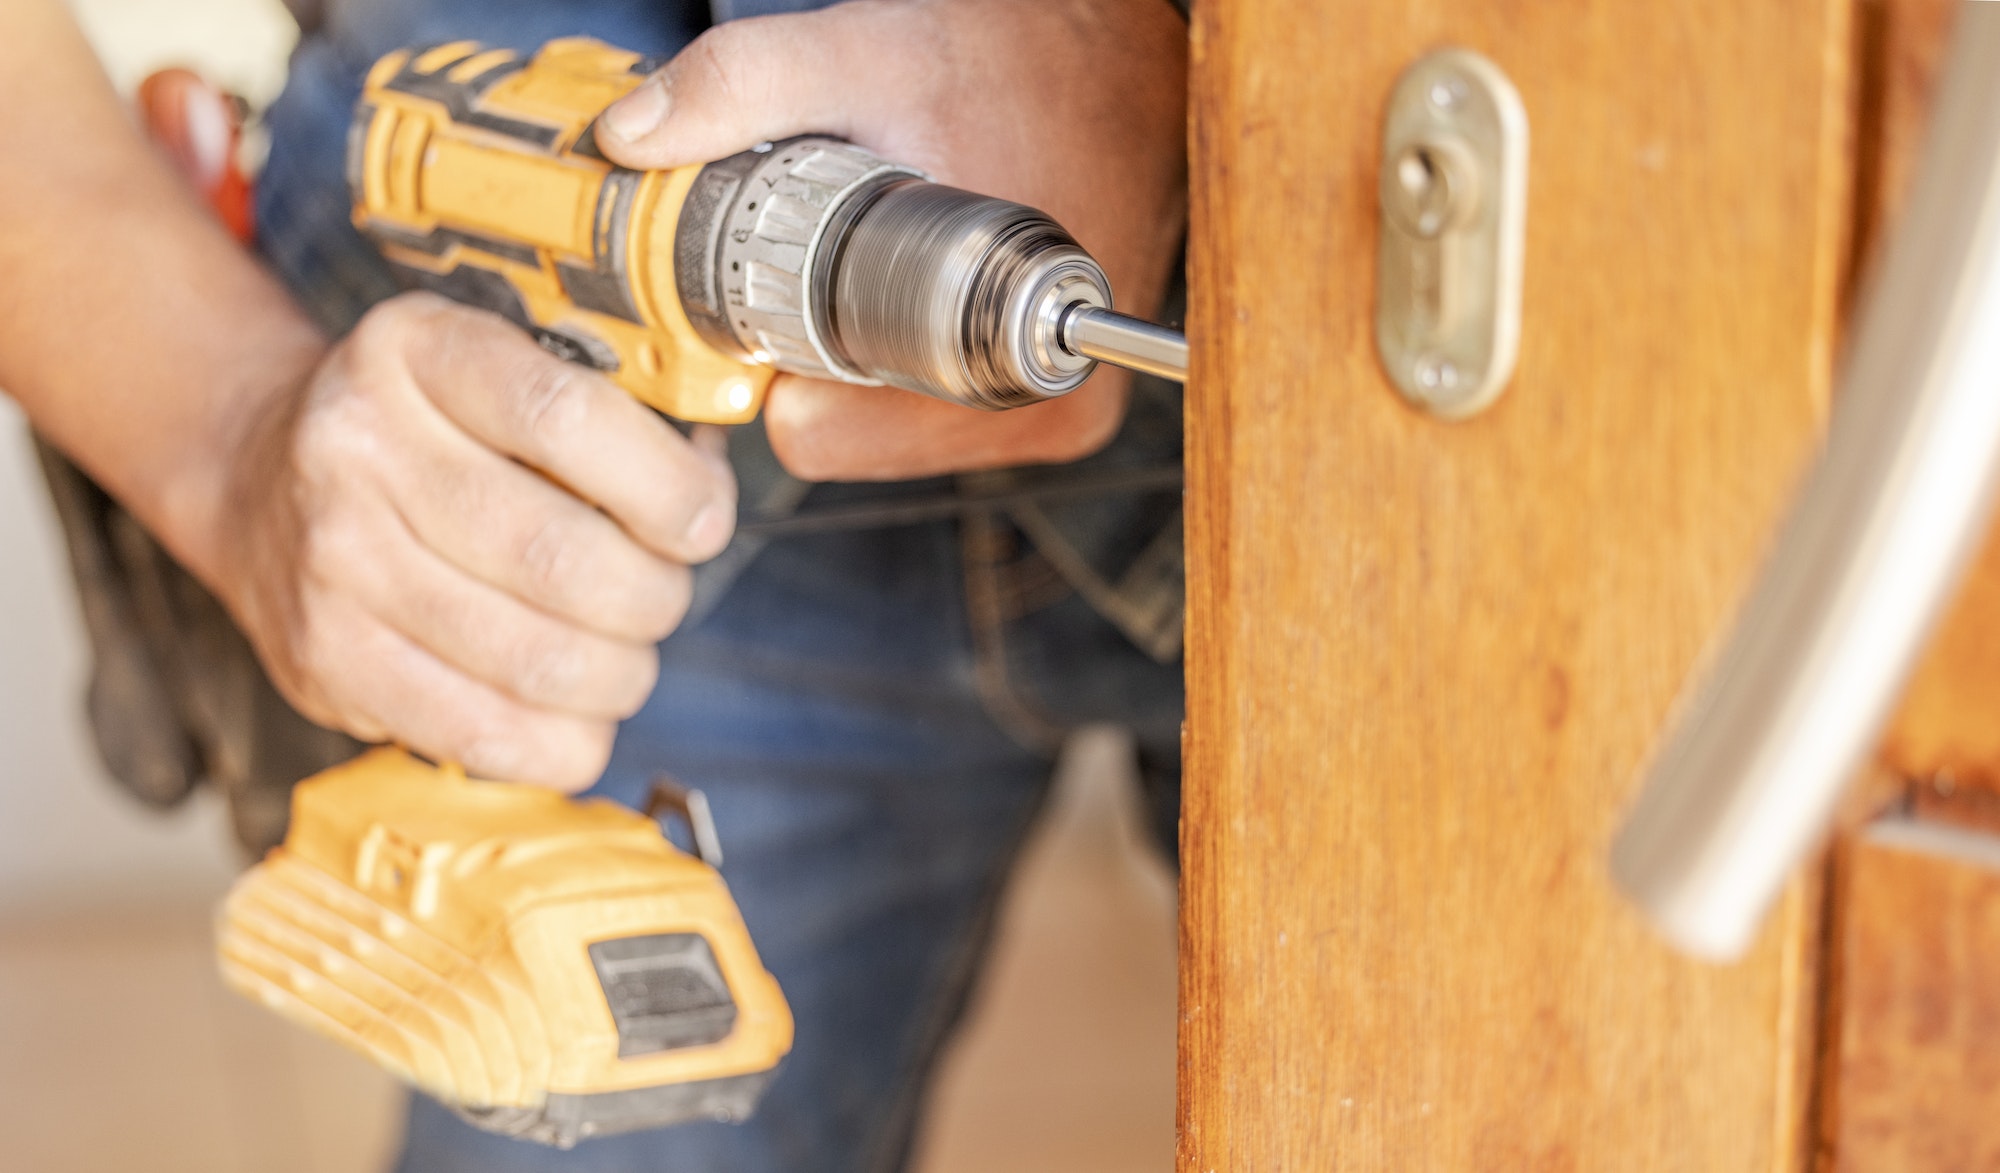 Locksmith hands, maintenance and handyman with construction and fixing, change door locks with tool